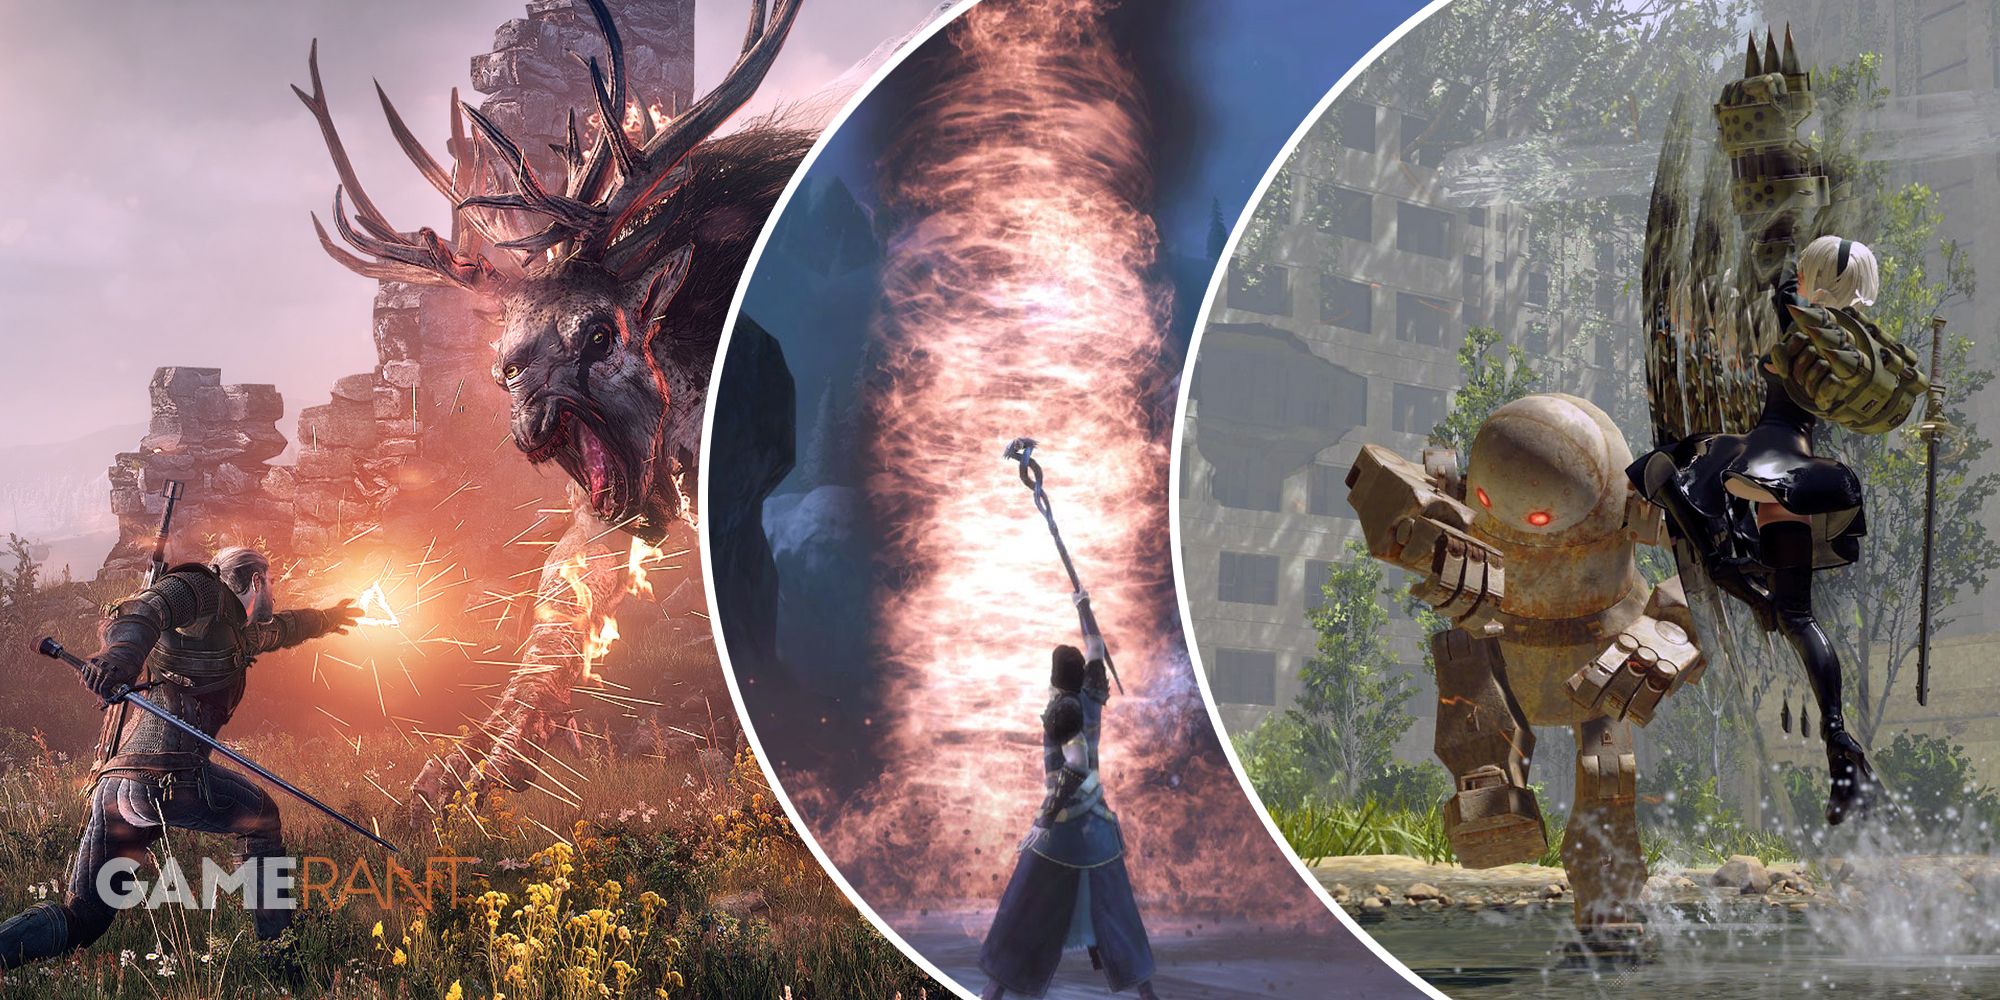 14 StoryDriven Games That Are Amazing (After A Rough Opening Few Hours)